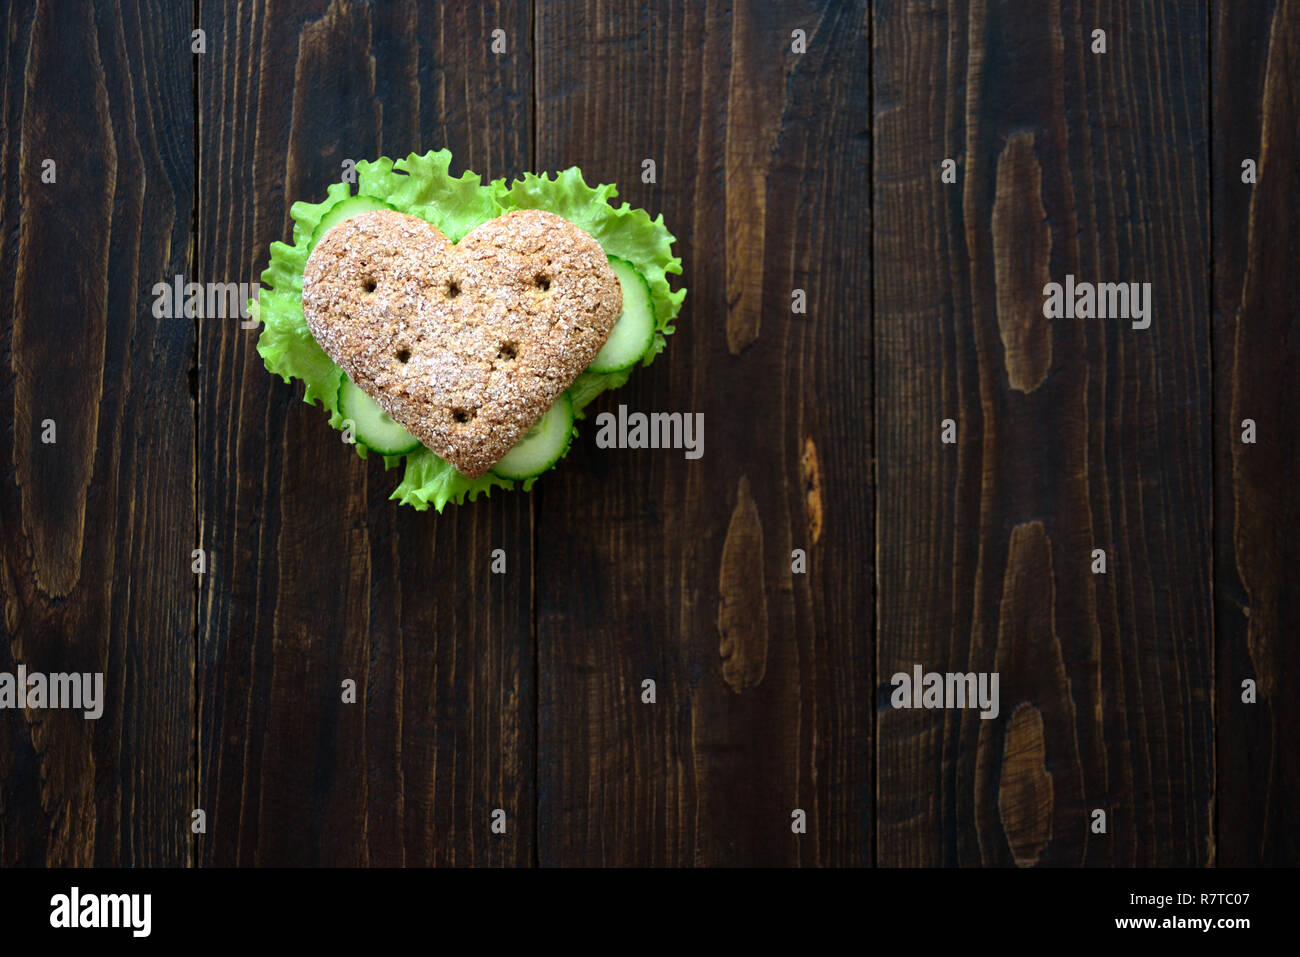 Healthy heart shape sandwich with salad and cucumbers. Dieting concept. Wooden background Stock Photo